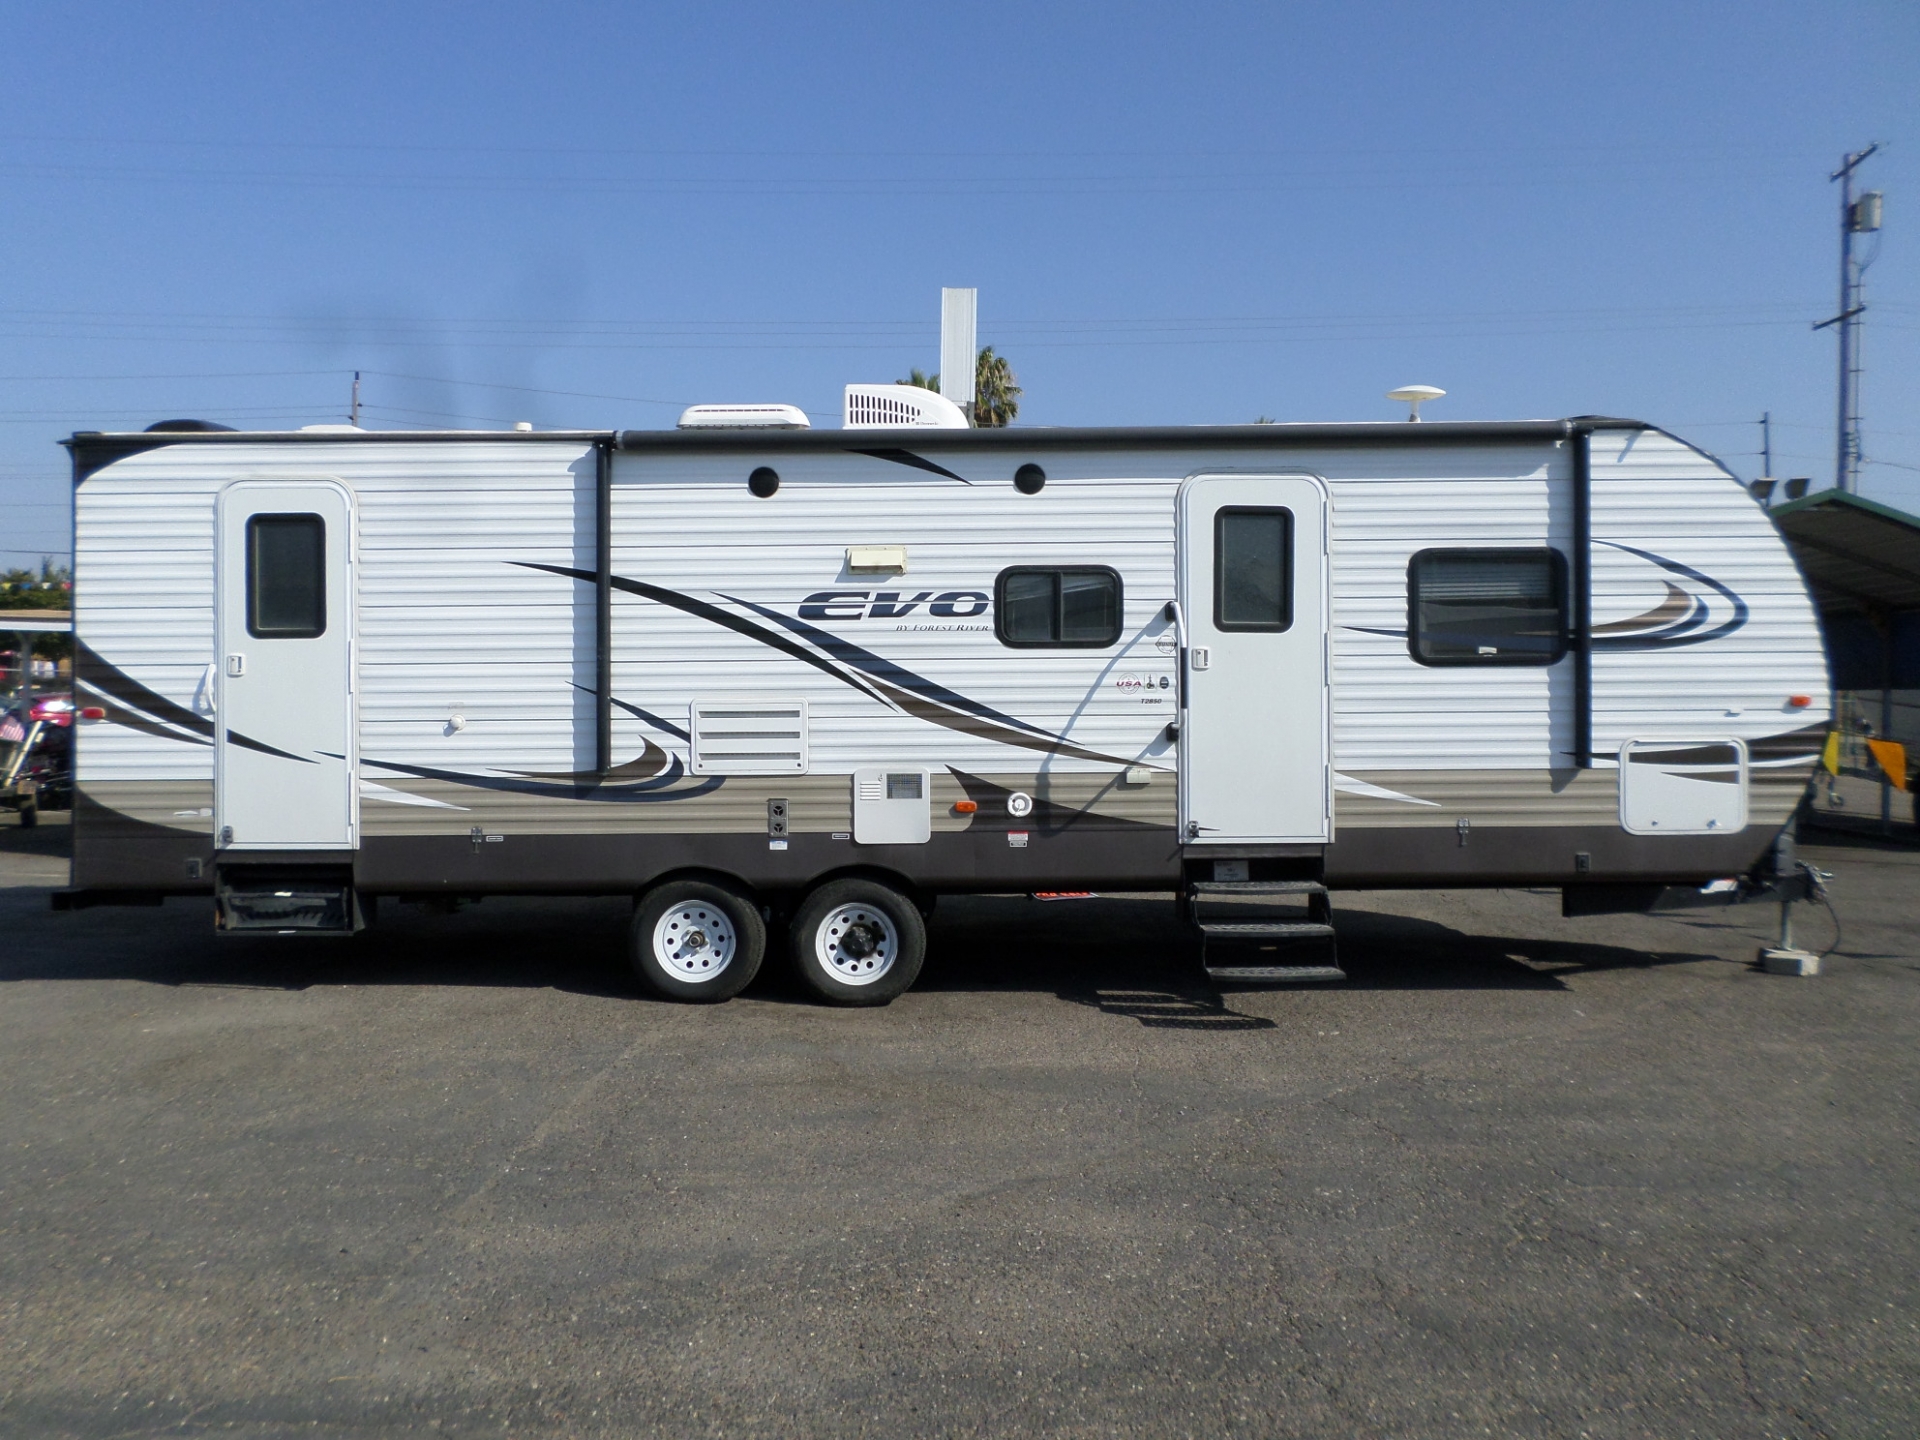 RV for sale: 2015 Forest River EVO T2850 Travel Trailer ...